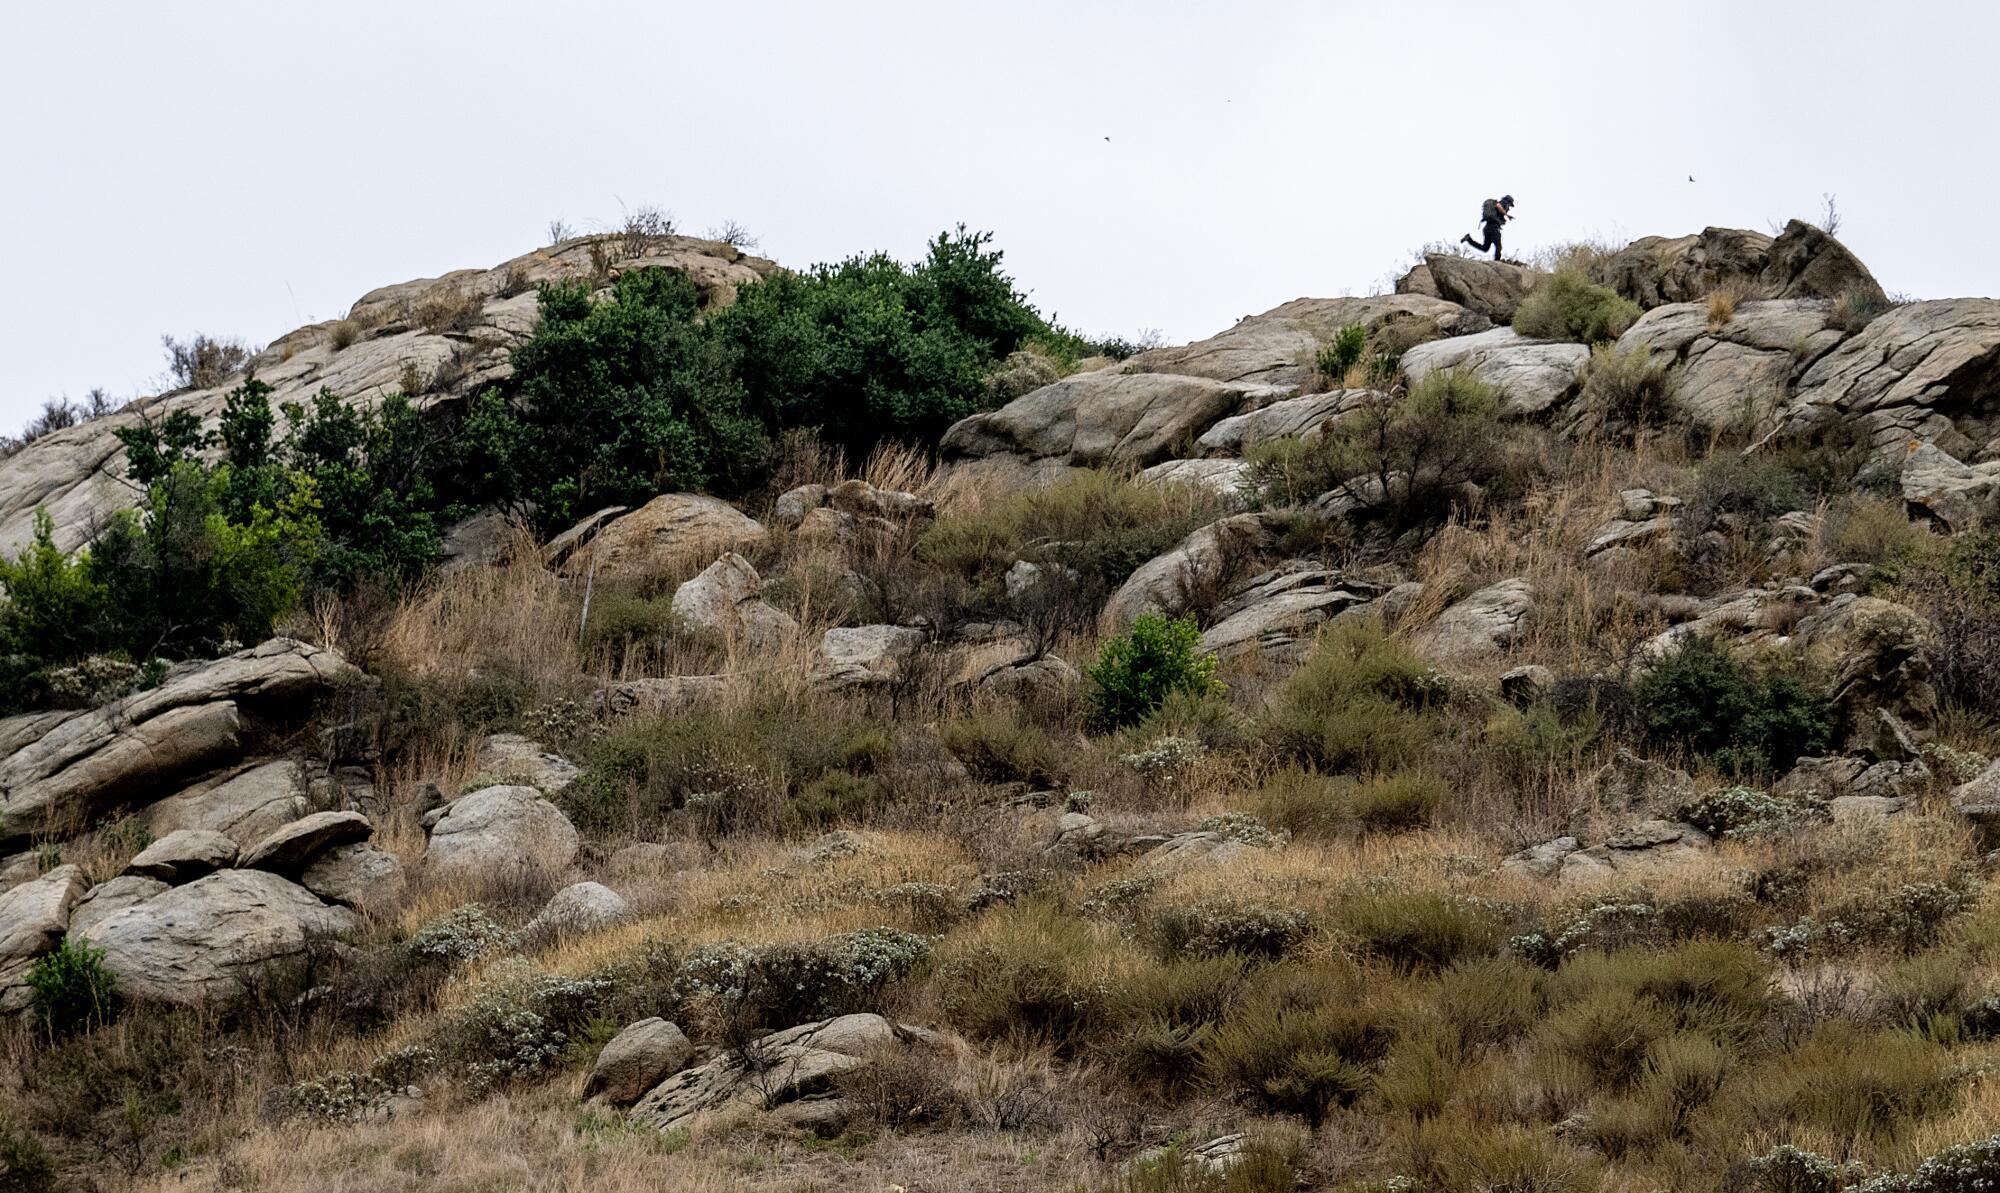 A lone figure runs atop a large rocky hill.